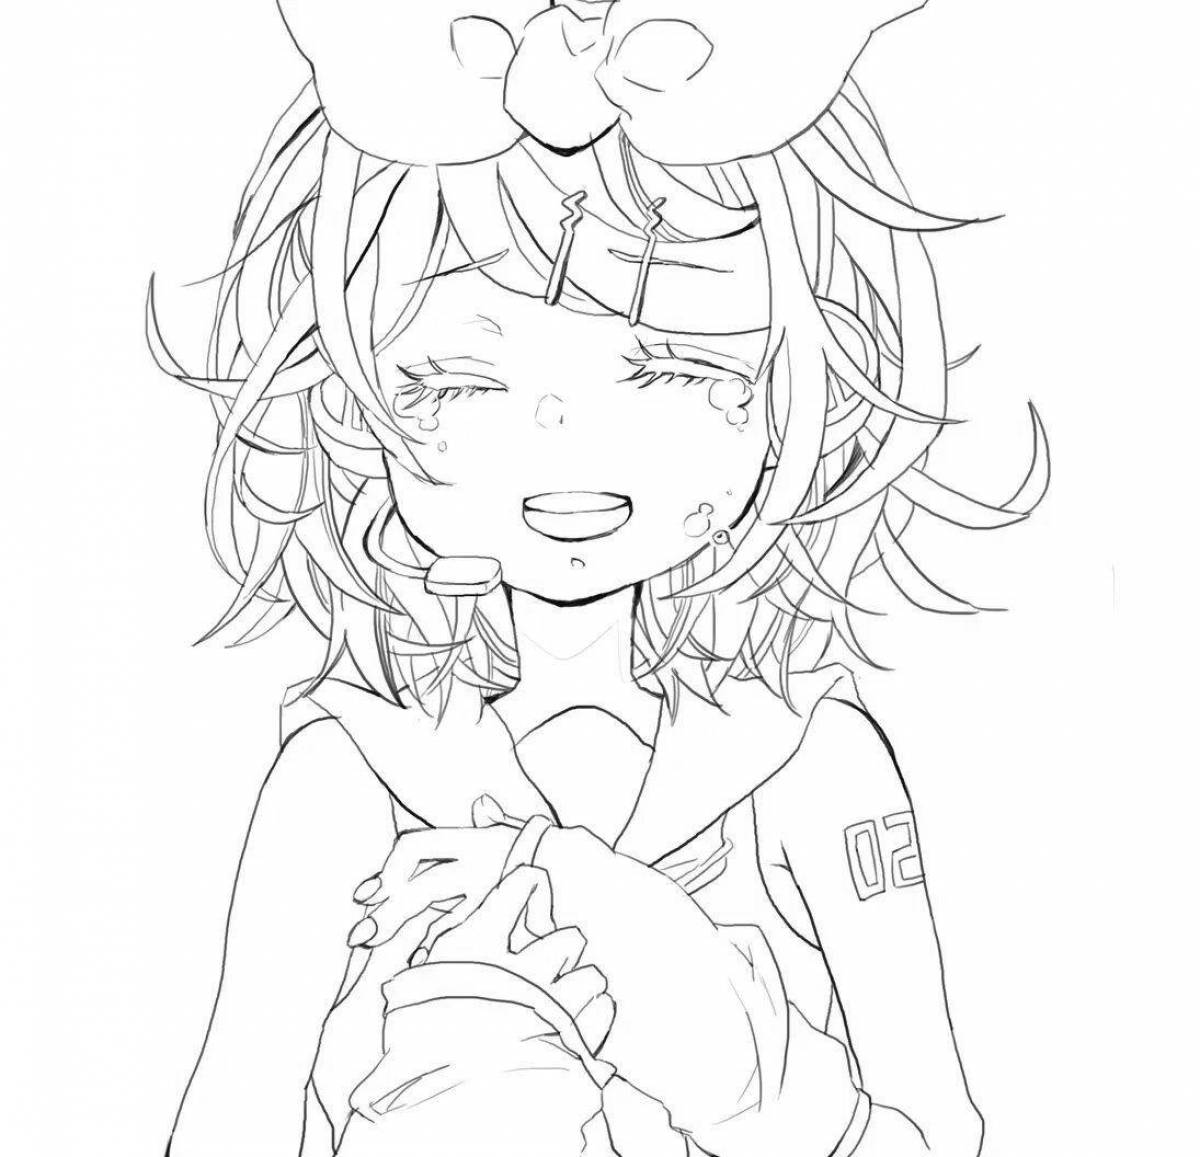 Charming vocaloid coloring page